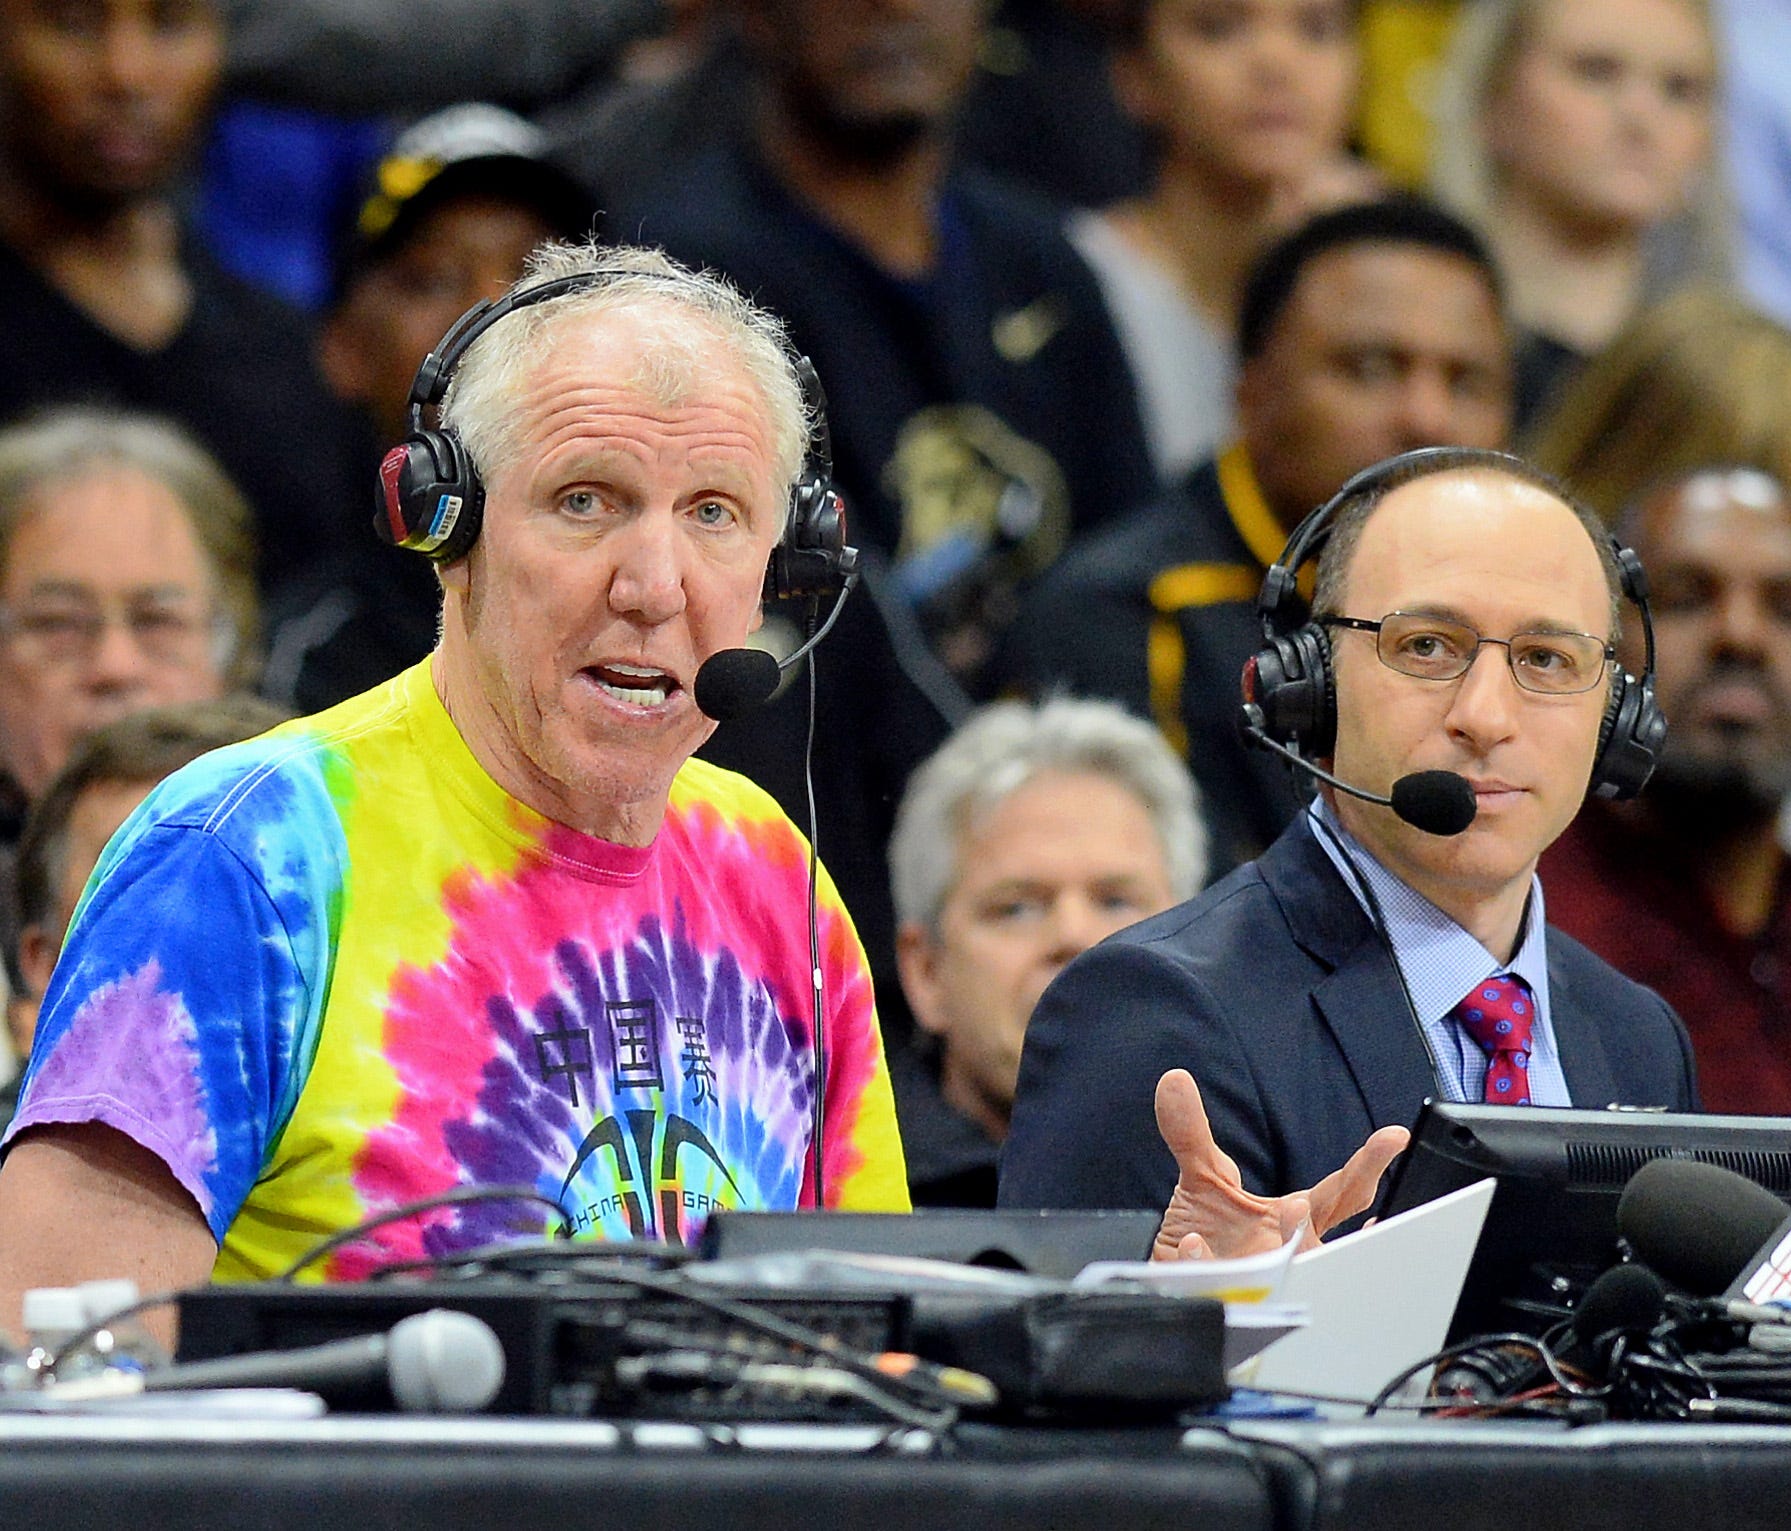 Mar 2, 2017; Boulder, CO, USA; American broadcaster Bill Walton speaks during the first half of the game between the Stanford Cardinal against the Colorado Buffaloes at the Coors Events Center. Mandatory Credit: Ron Chenoy-USA TODAY Sports ORG XMIT: 